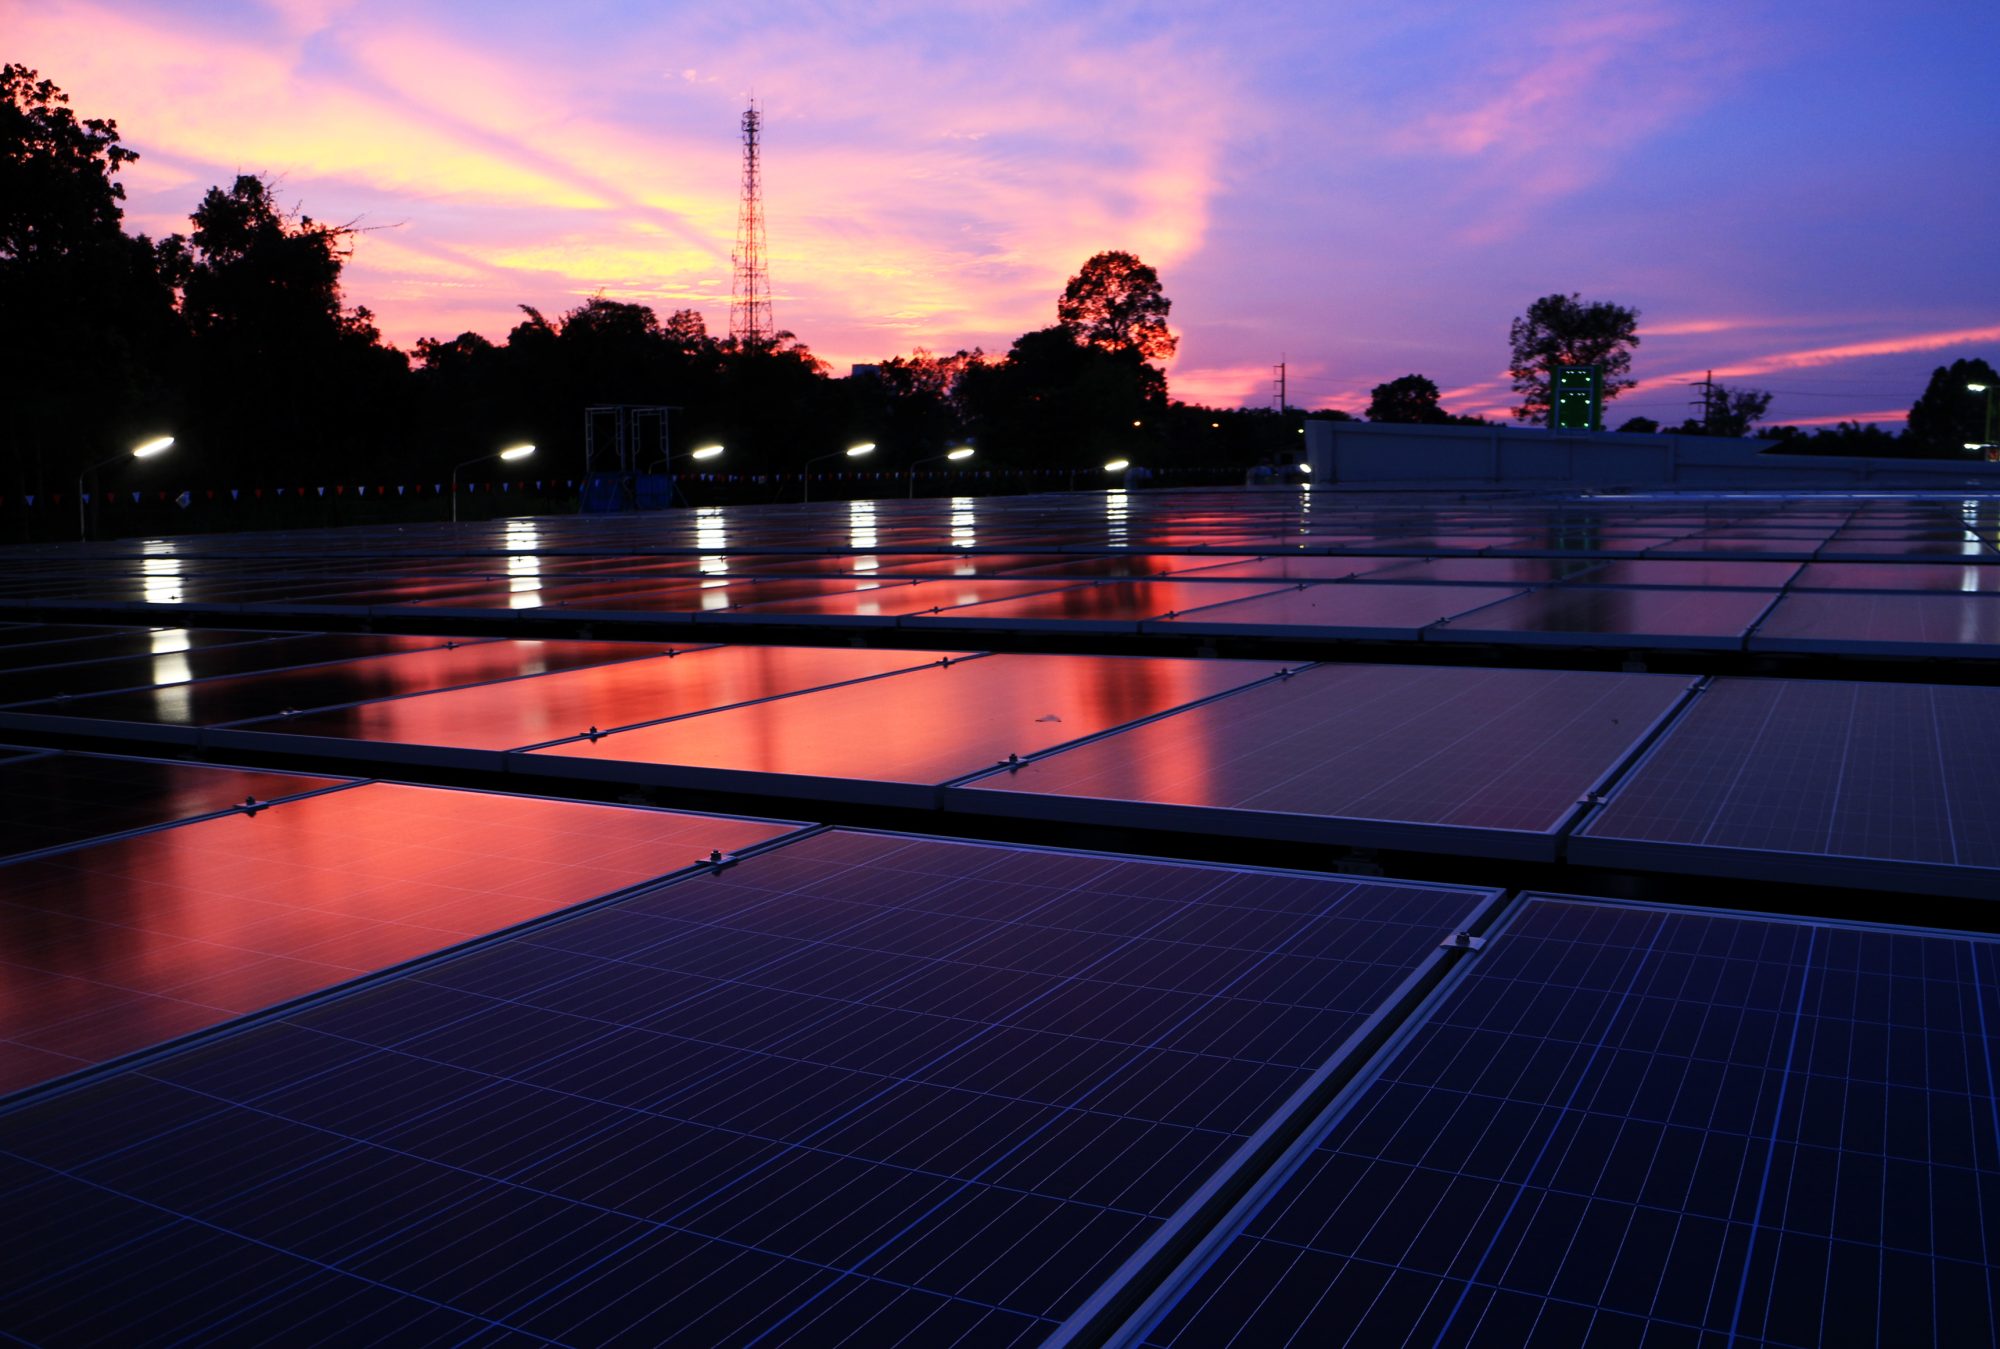 Solar PV Rooftop at Dawn Red Cloud colorful Sky